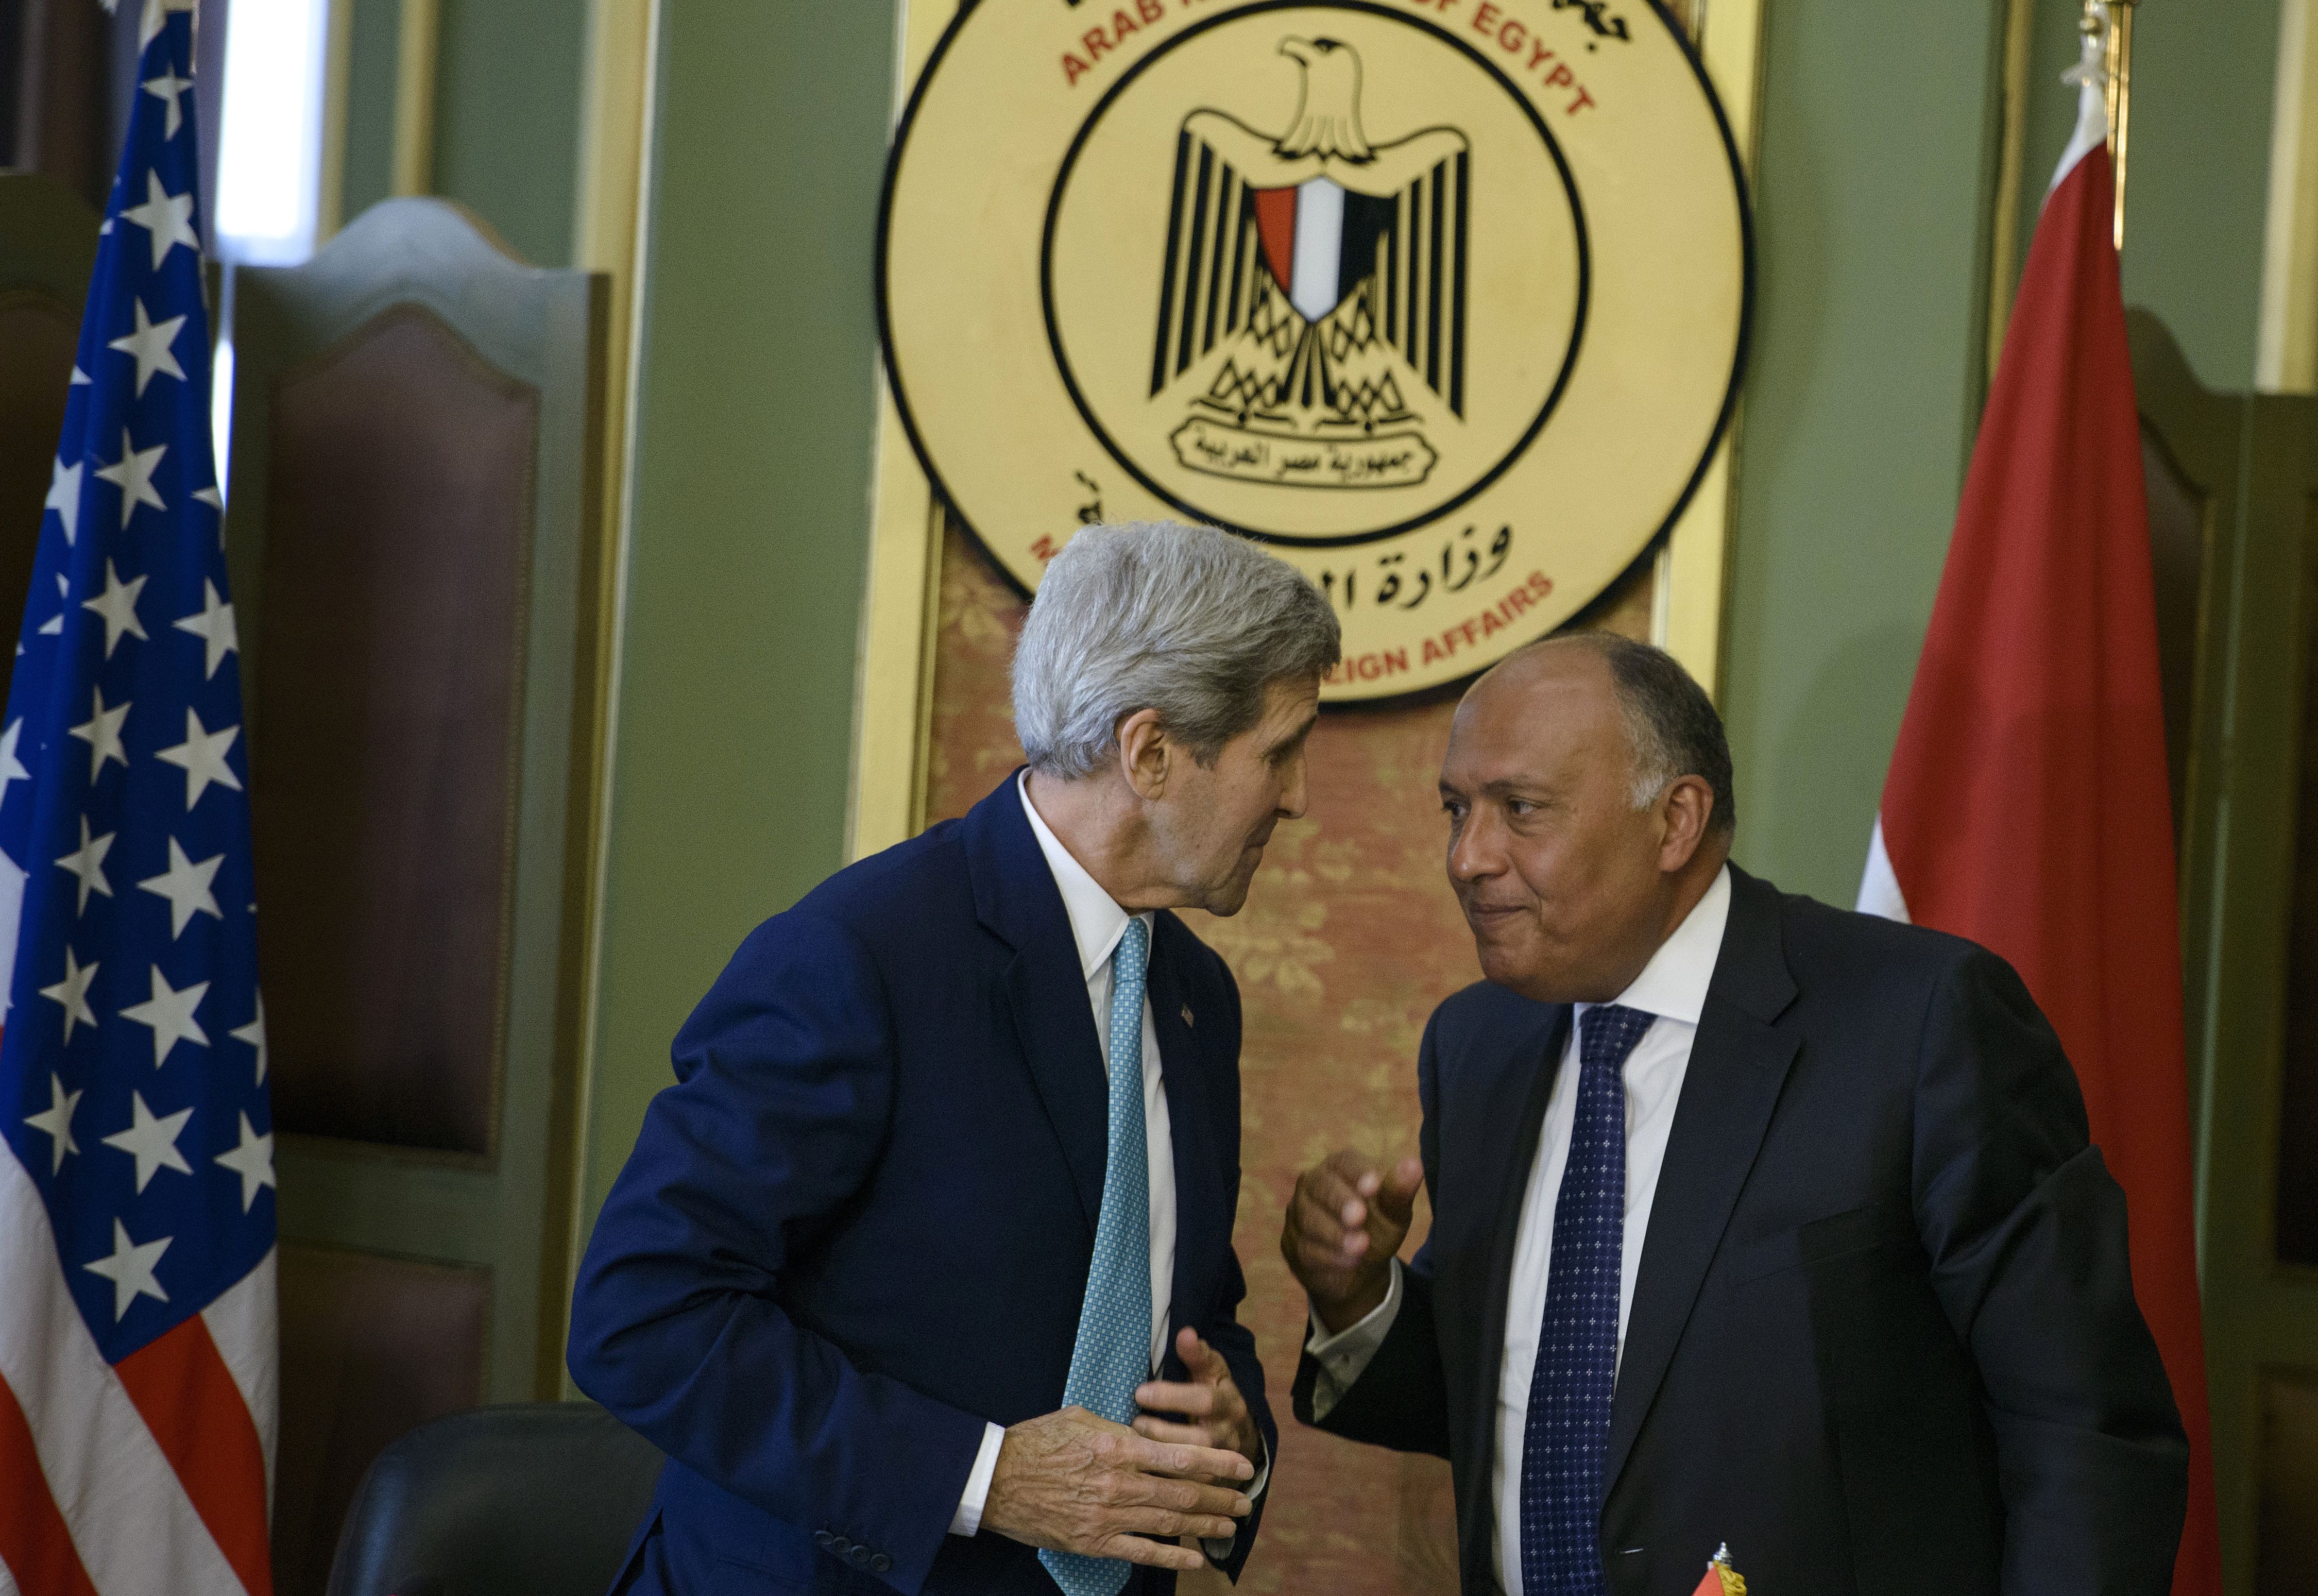 US Secretary of State John Kerry (L) and Egypt's Foreign Minister Sameh Shoukry. BRENDAN SMIALOWSKI/AFP/Getty Images)